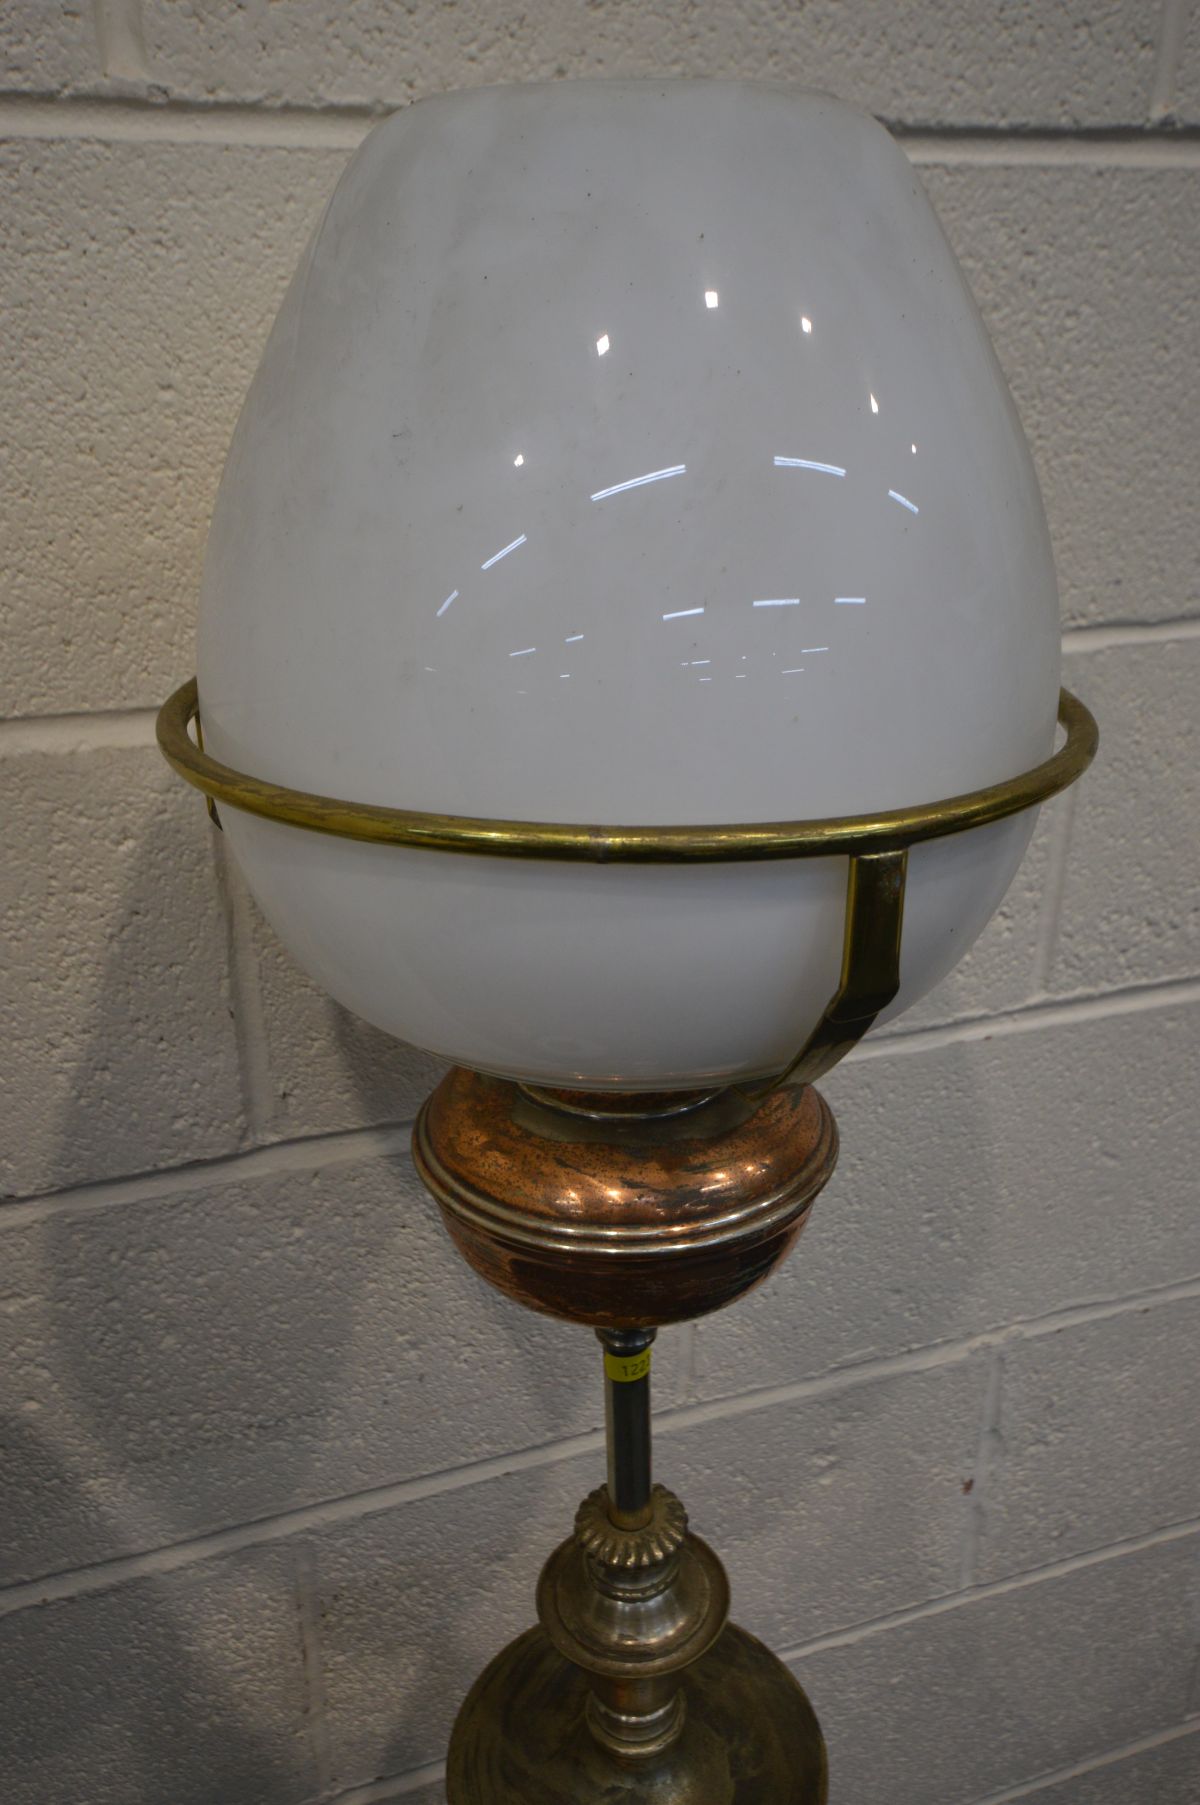 A TELESCOPIC OIL LAMP, white glass shade, brass reservoir, min height 133cm x max height 198cm, with - Image 2 of 4